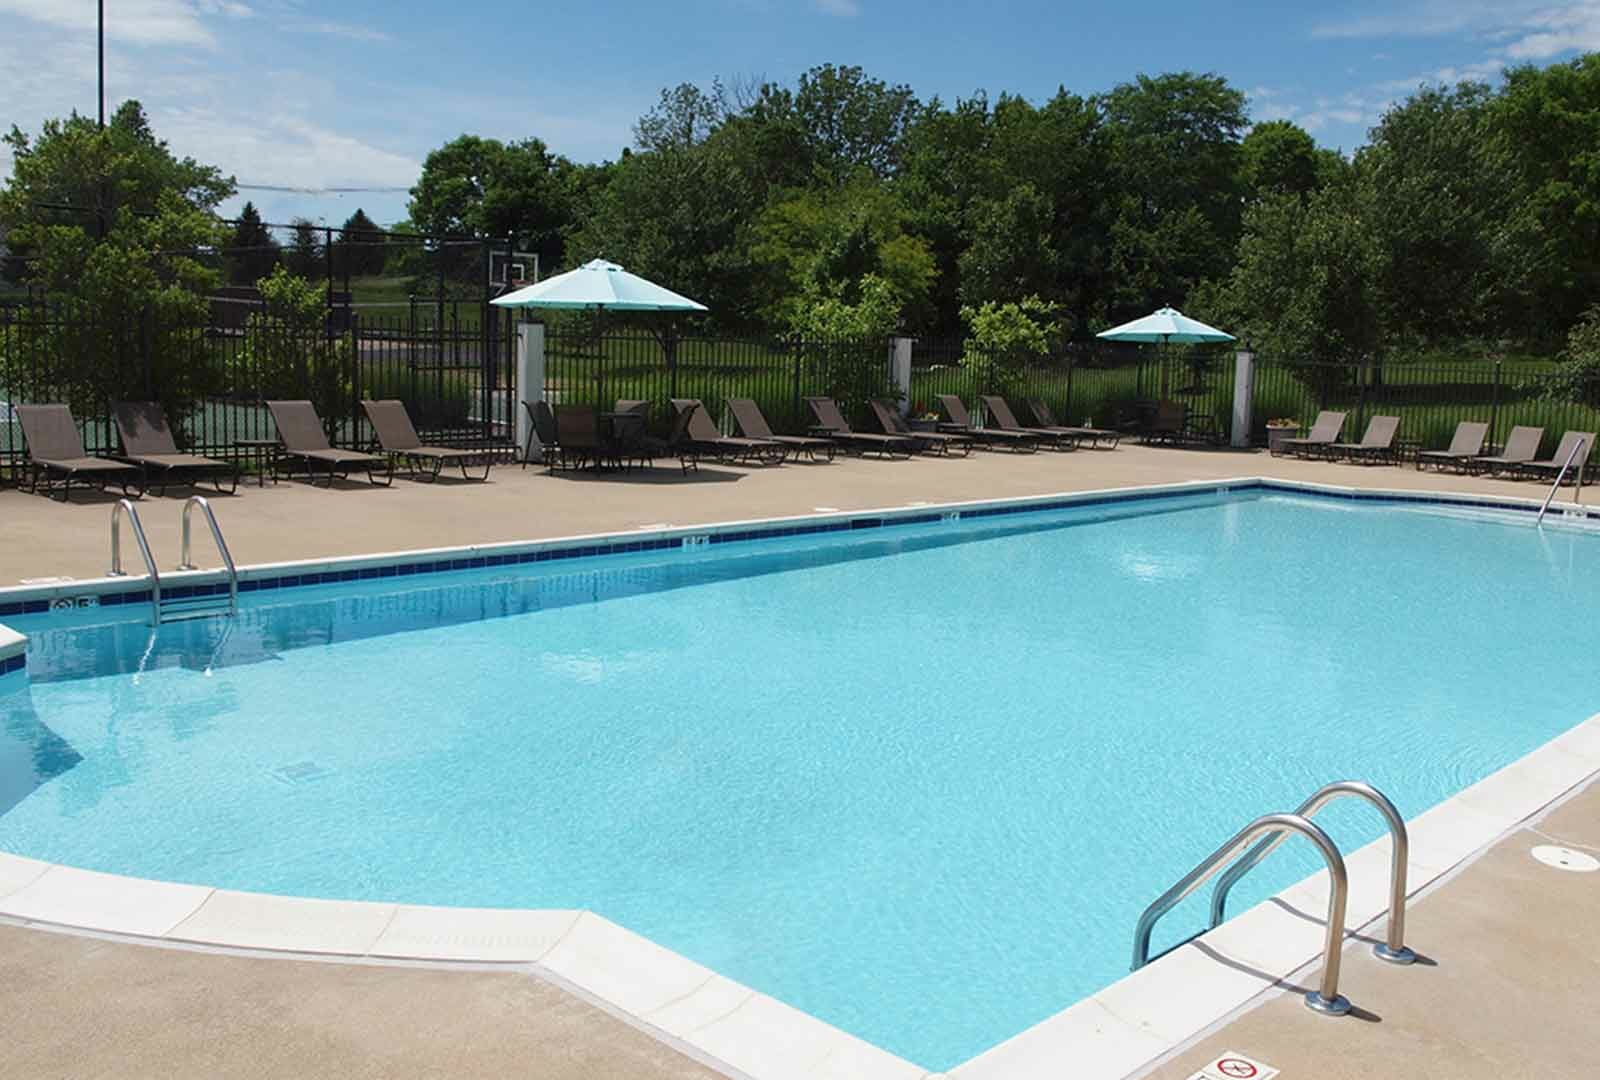 Outdoor pool with lounge deck at Shadow Ridge.